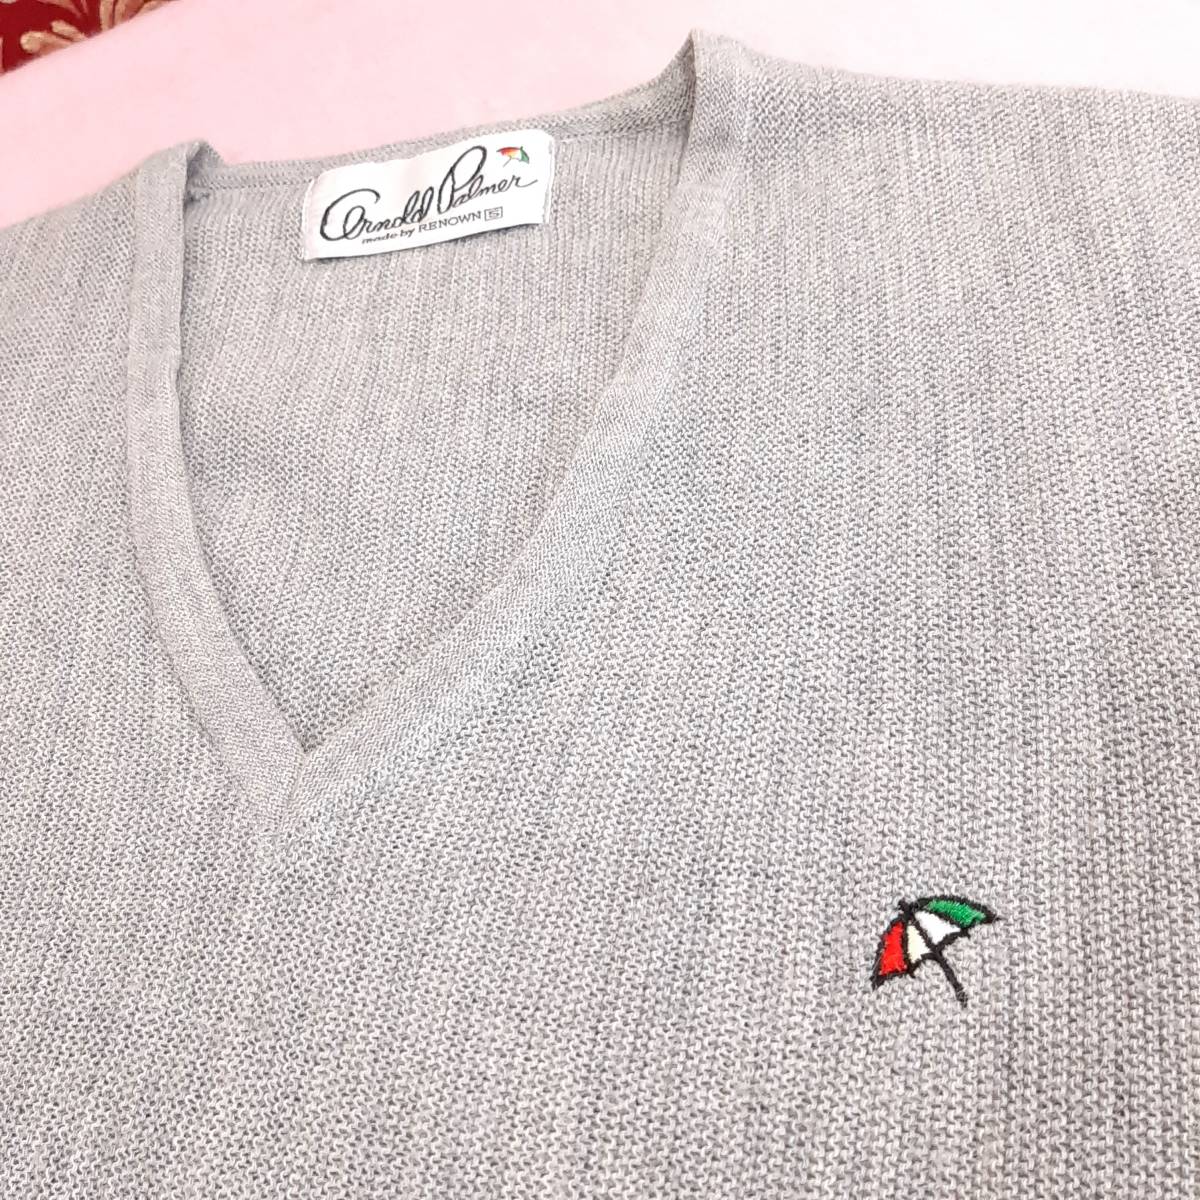 d7* beautiful goods *Arnold Palmer Arnold Palmer corporation Rena un* brand long sleeve design sweater knitted men's S size gray man and woman use Golf 